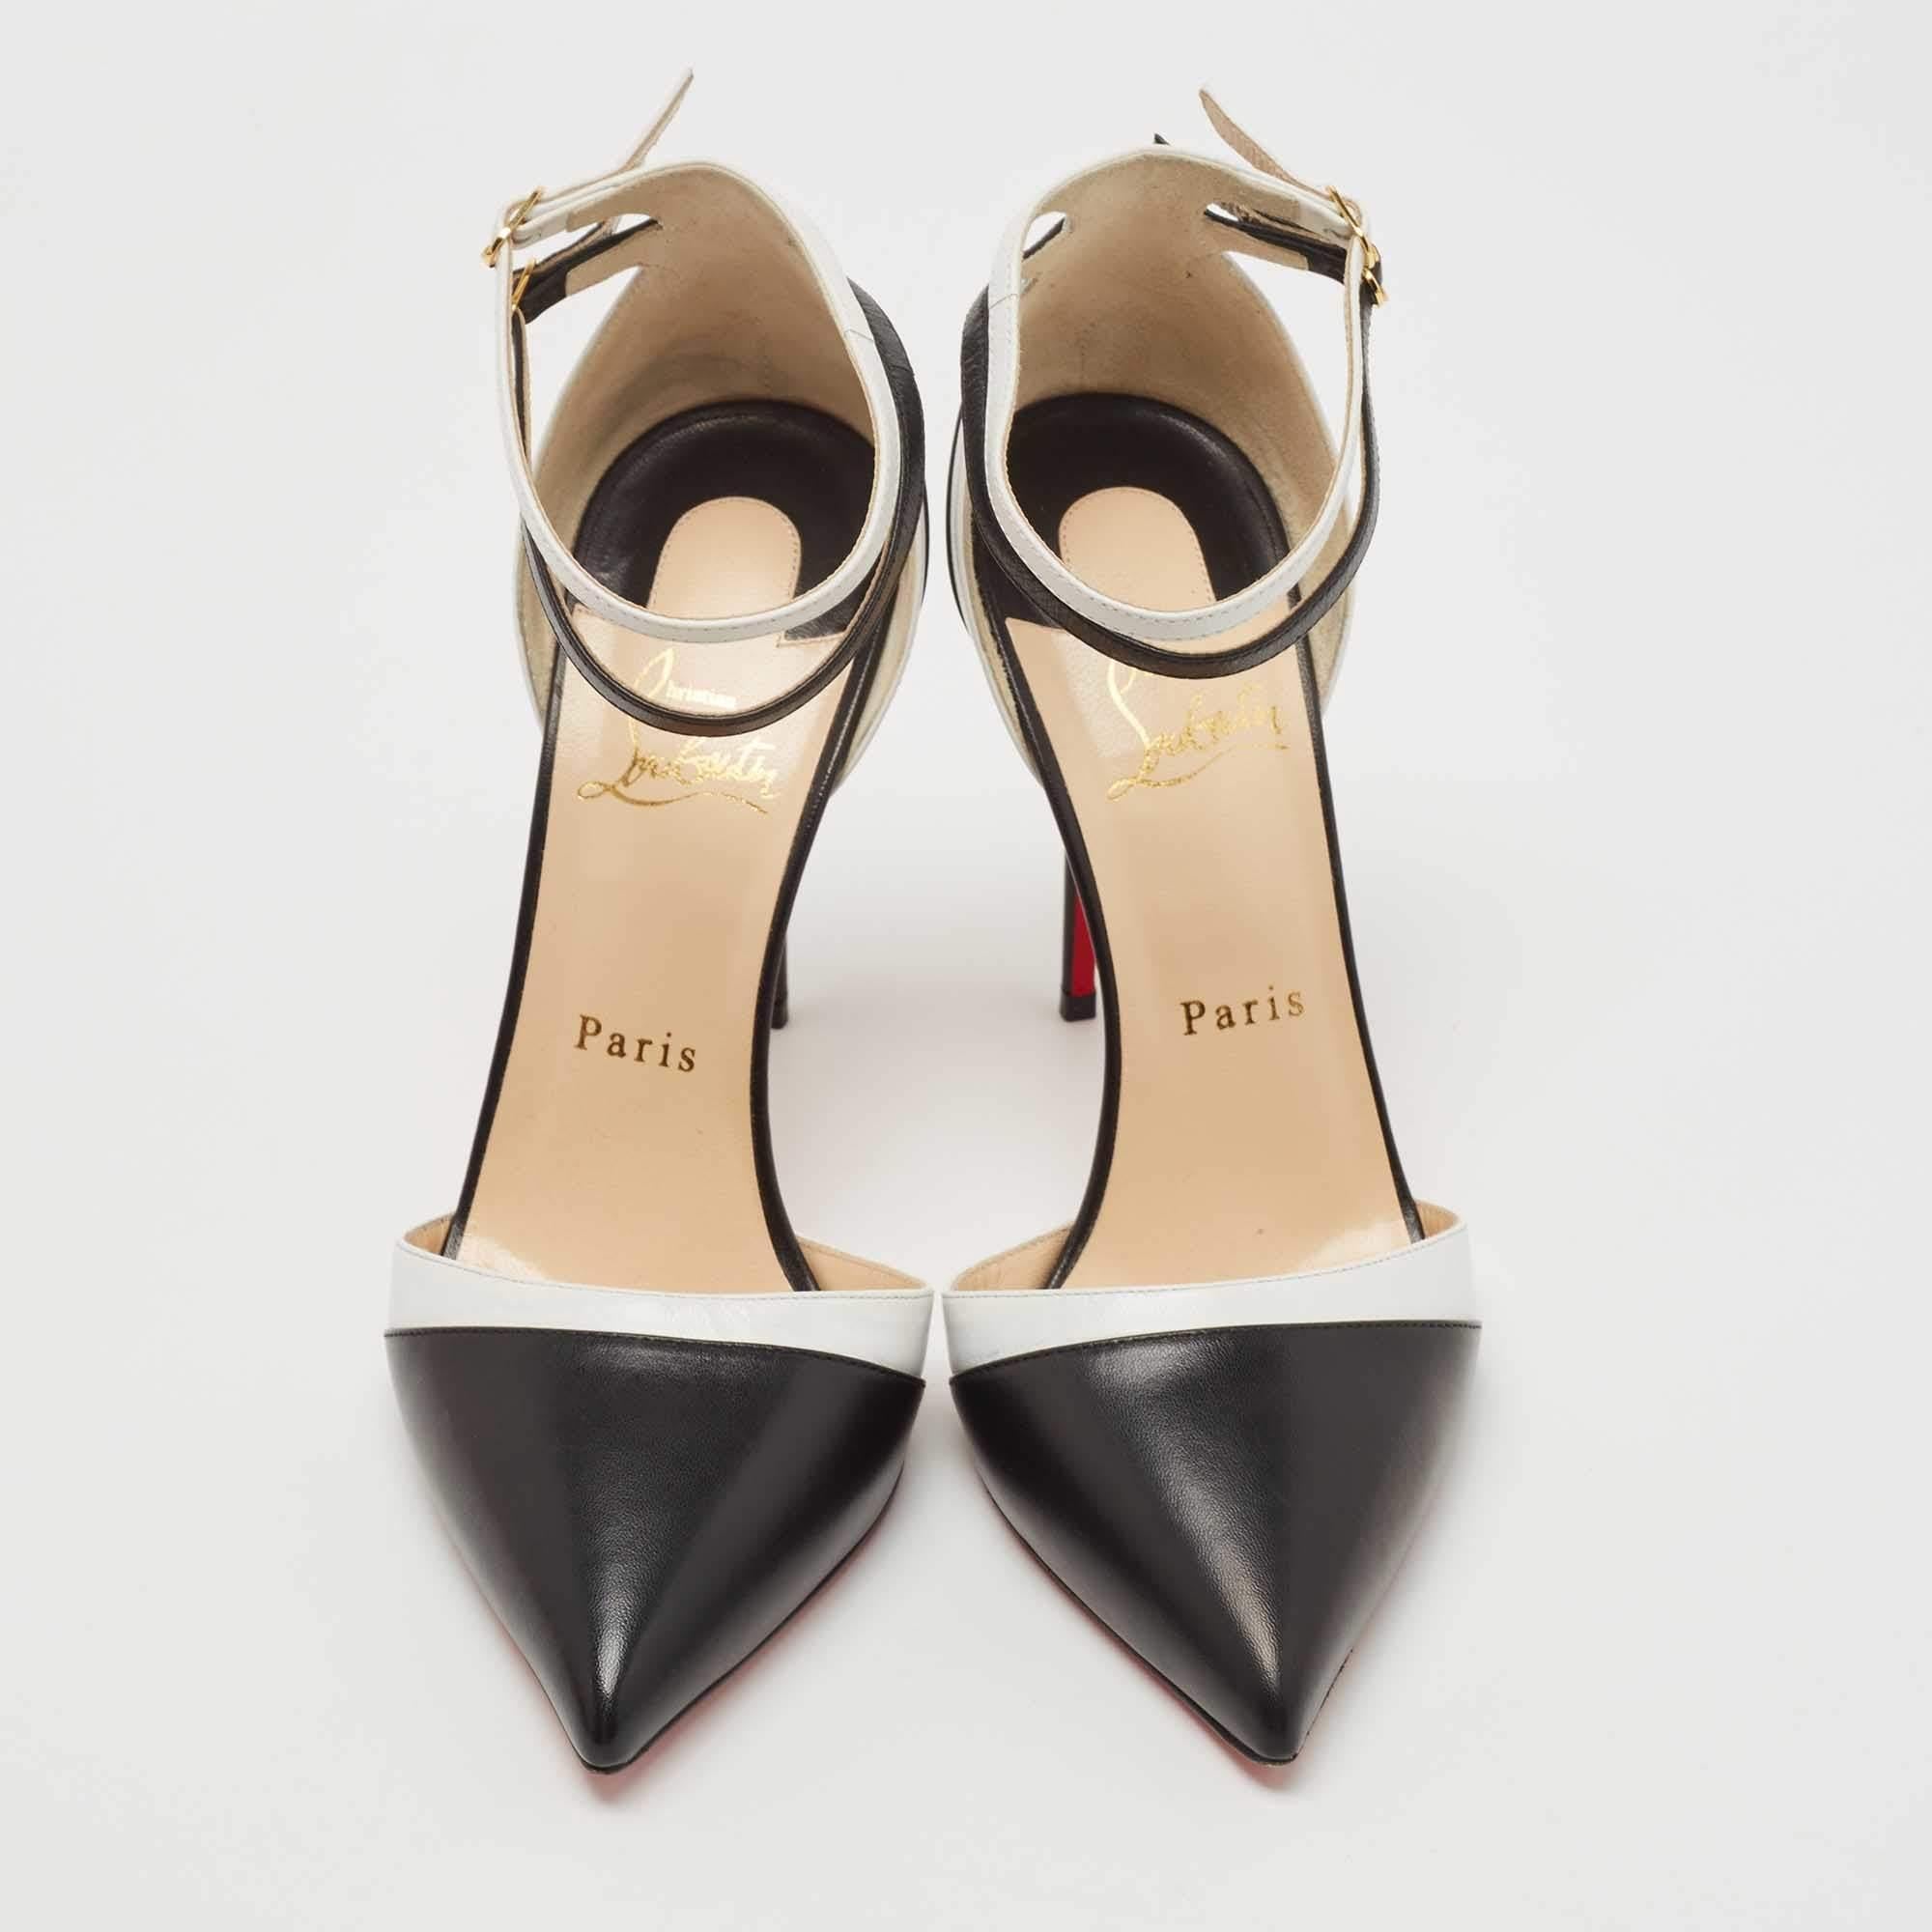 Curvaceous arches, a feminine appeal, and a well-built structure define this set of Christian Louboutin pumps. Coming with comfortable insoles and sleek heels, style them with your favorite outfits.

Includes
Original Dustbag